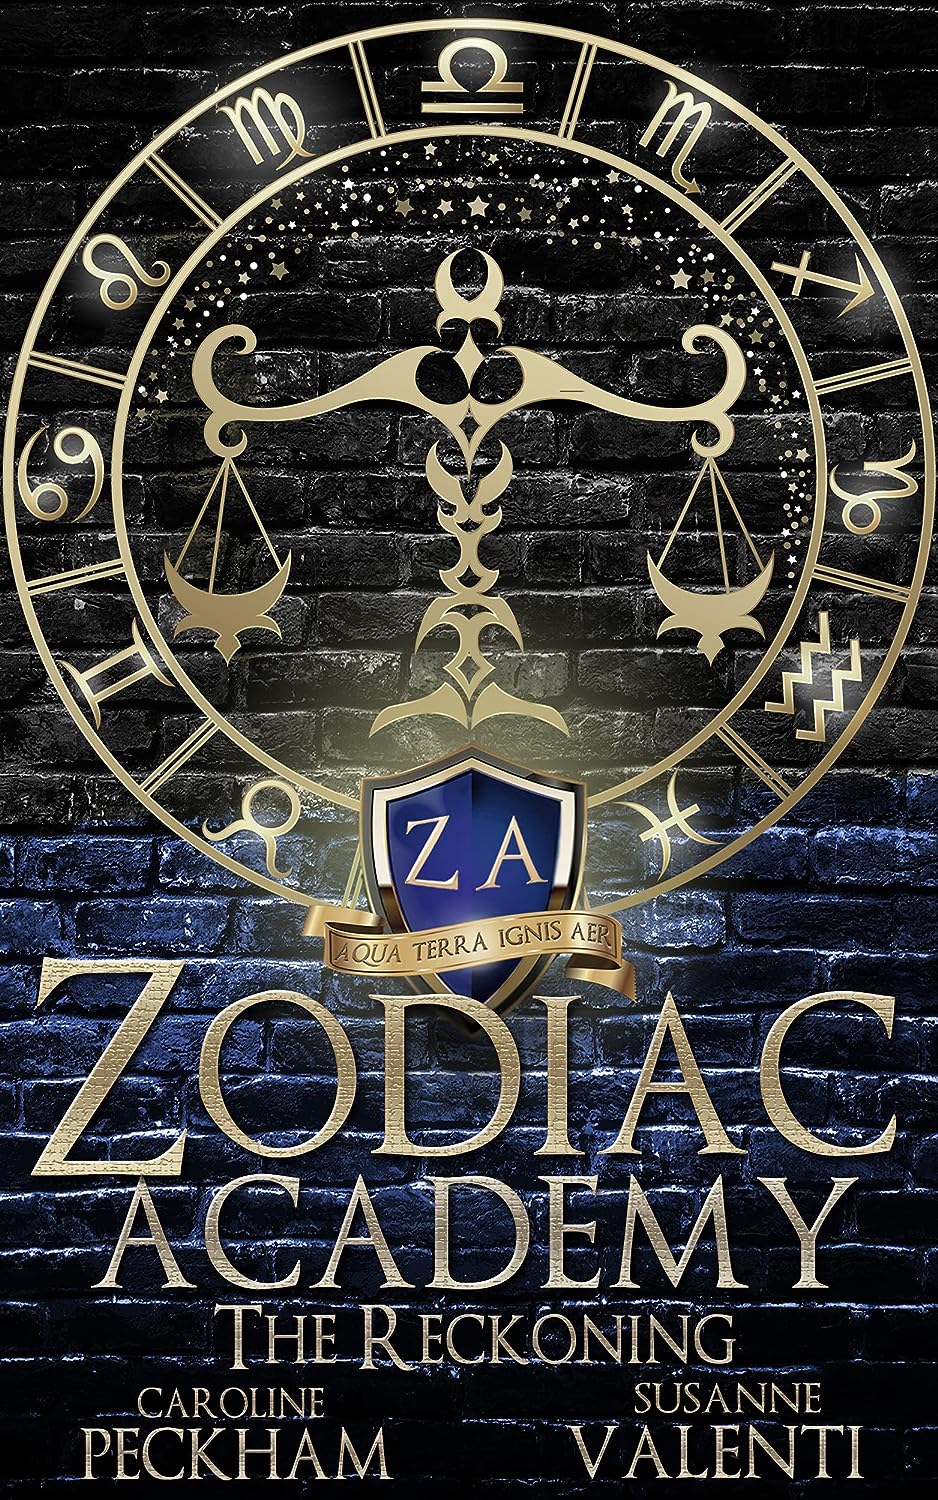 The Reckoning (Zodiac Academy Book 3) by Caoline…